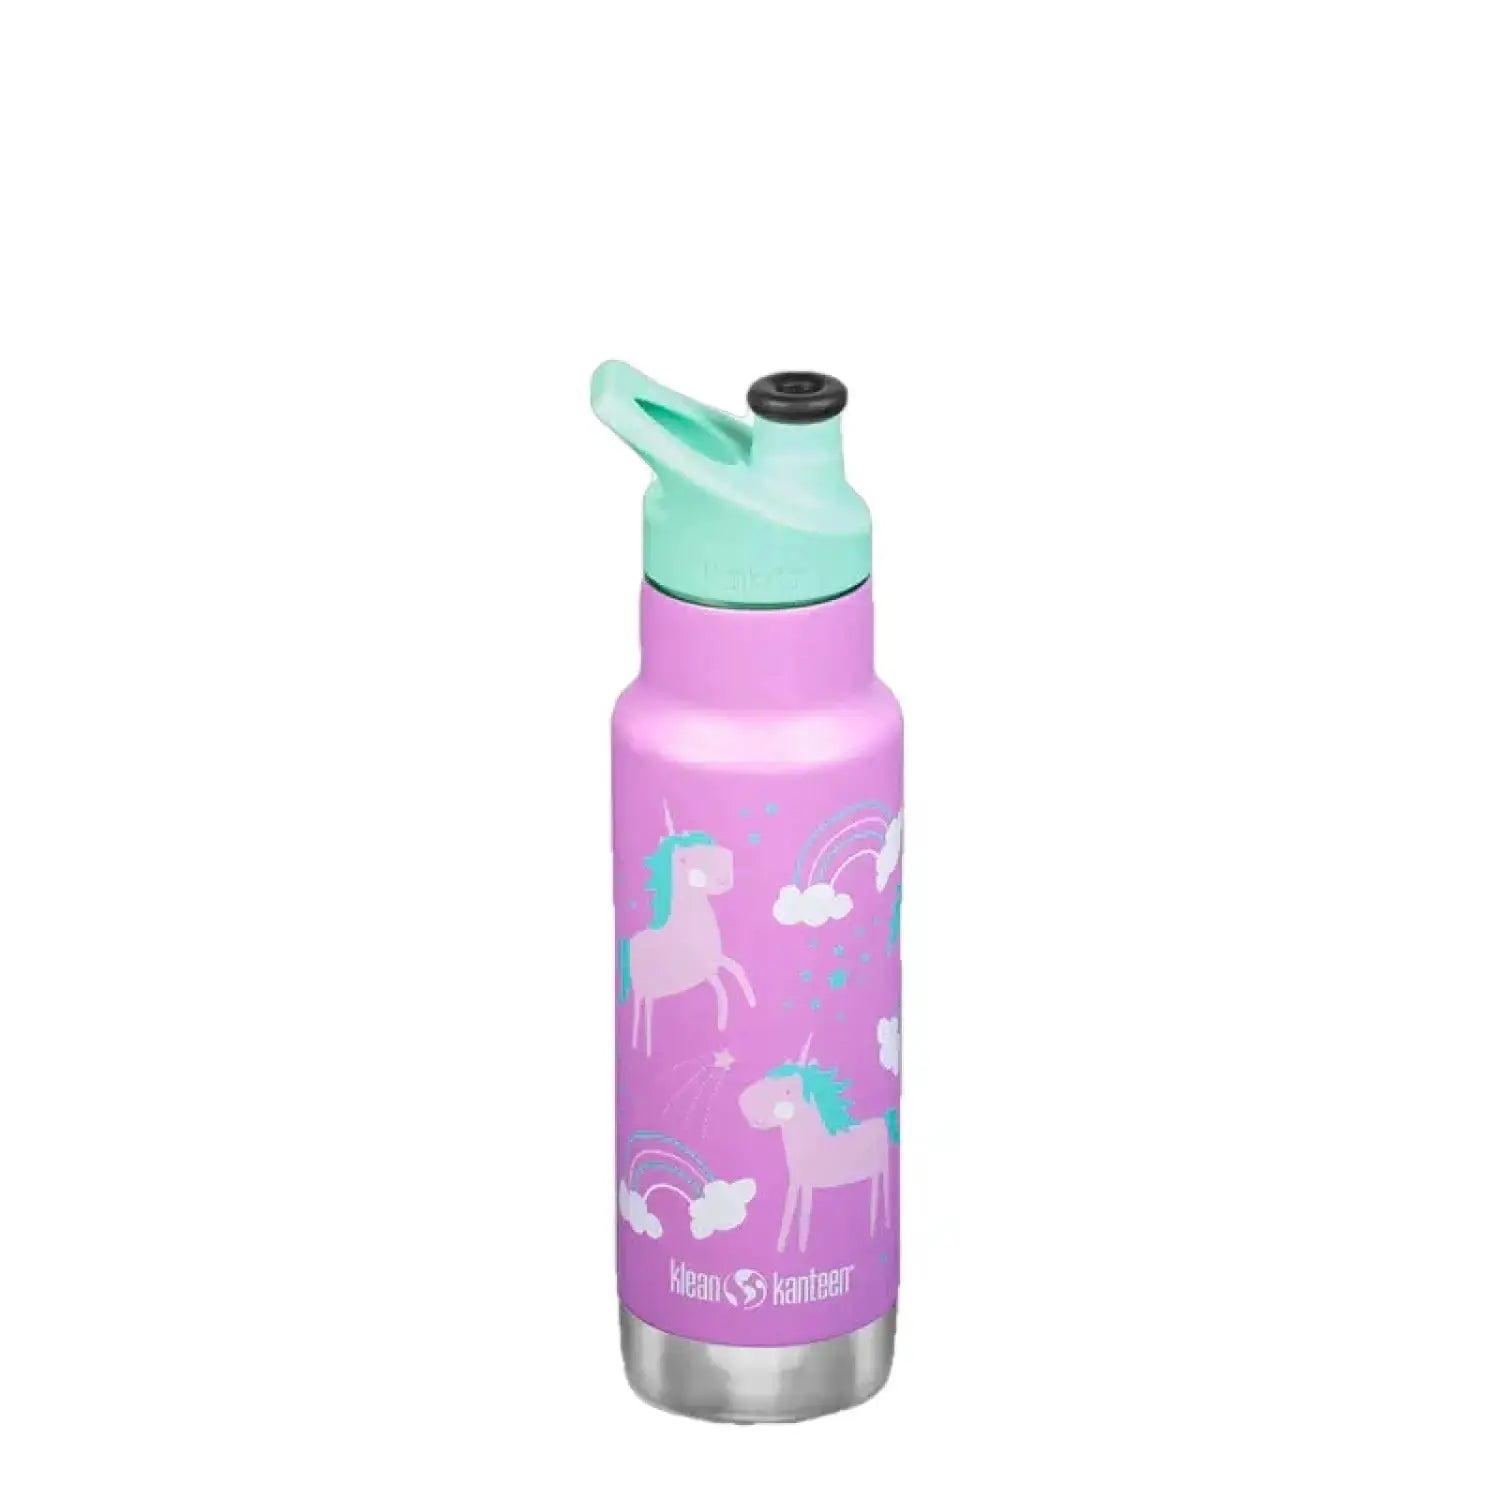 Klean Kanteen Classic Kid's Insulated Water Bottle with Sport Cap